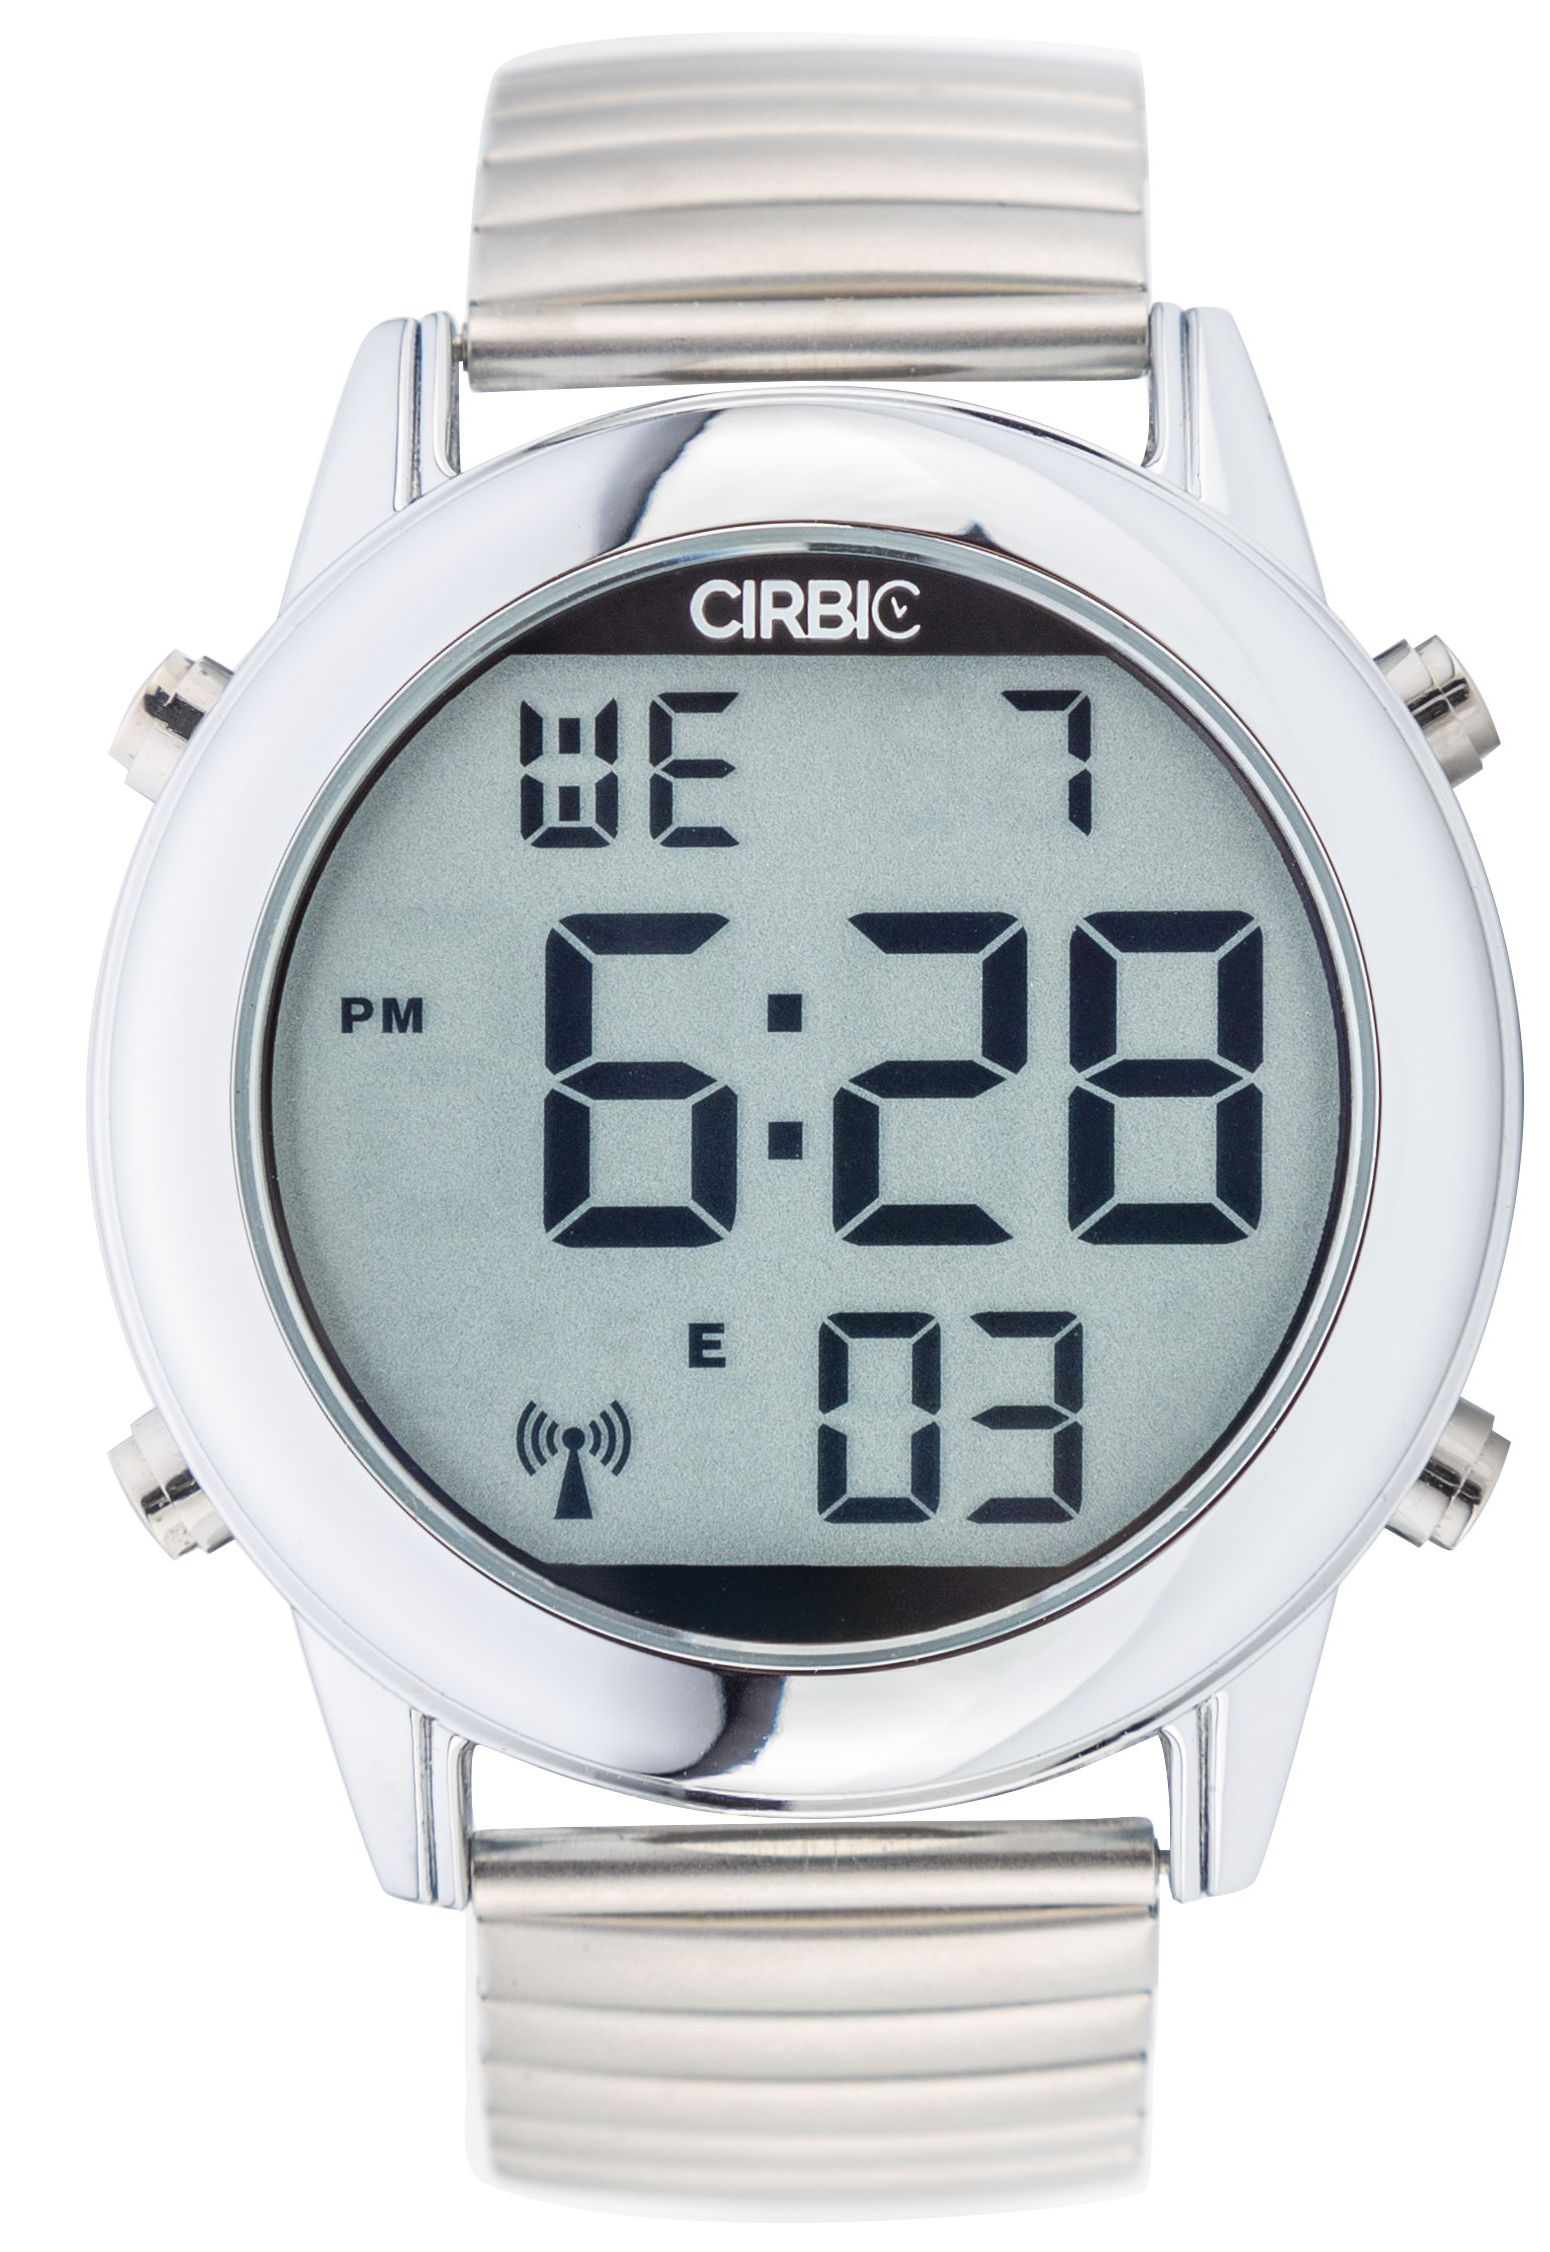 Cirbic Large, Clear English Voice Digital Talking Watch for The Blind,  Visually impaired or Elderly. – Cirbic – products for visually impaired